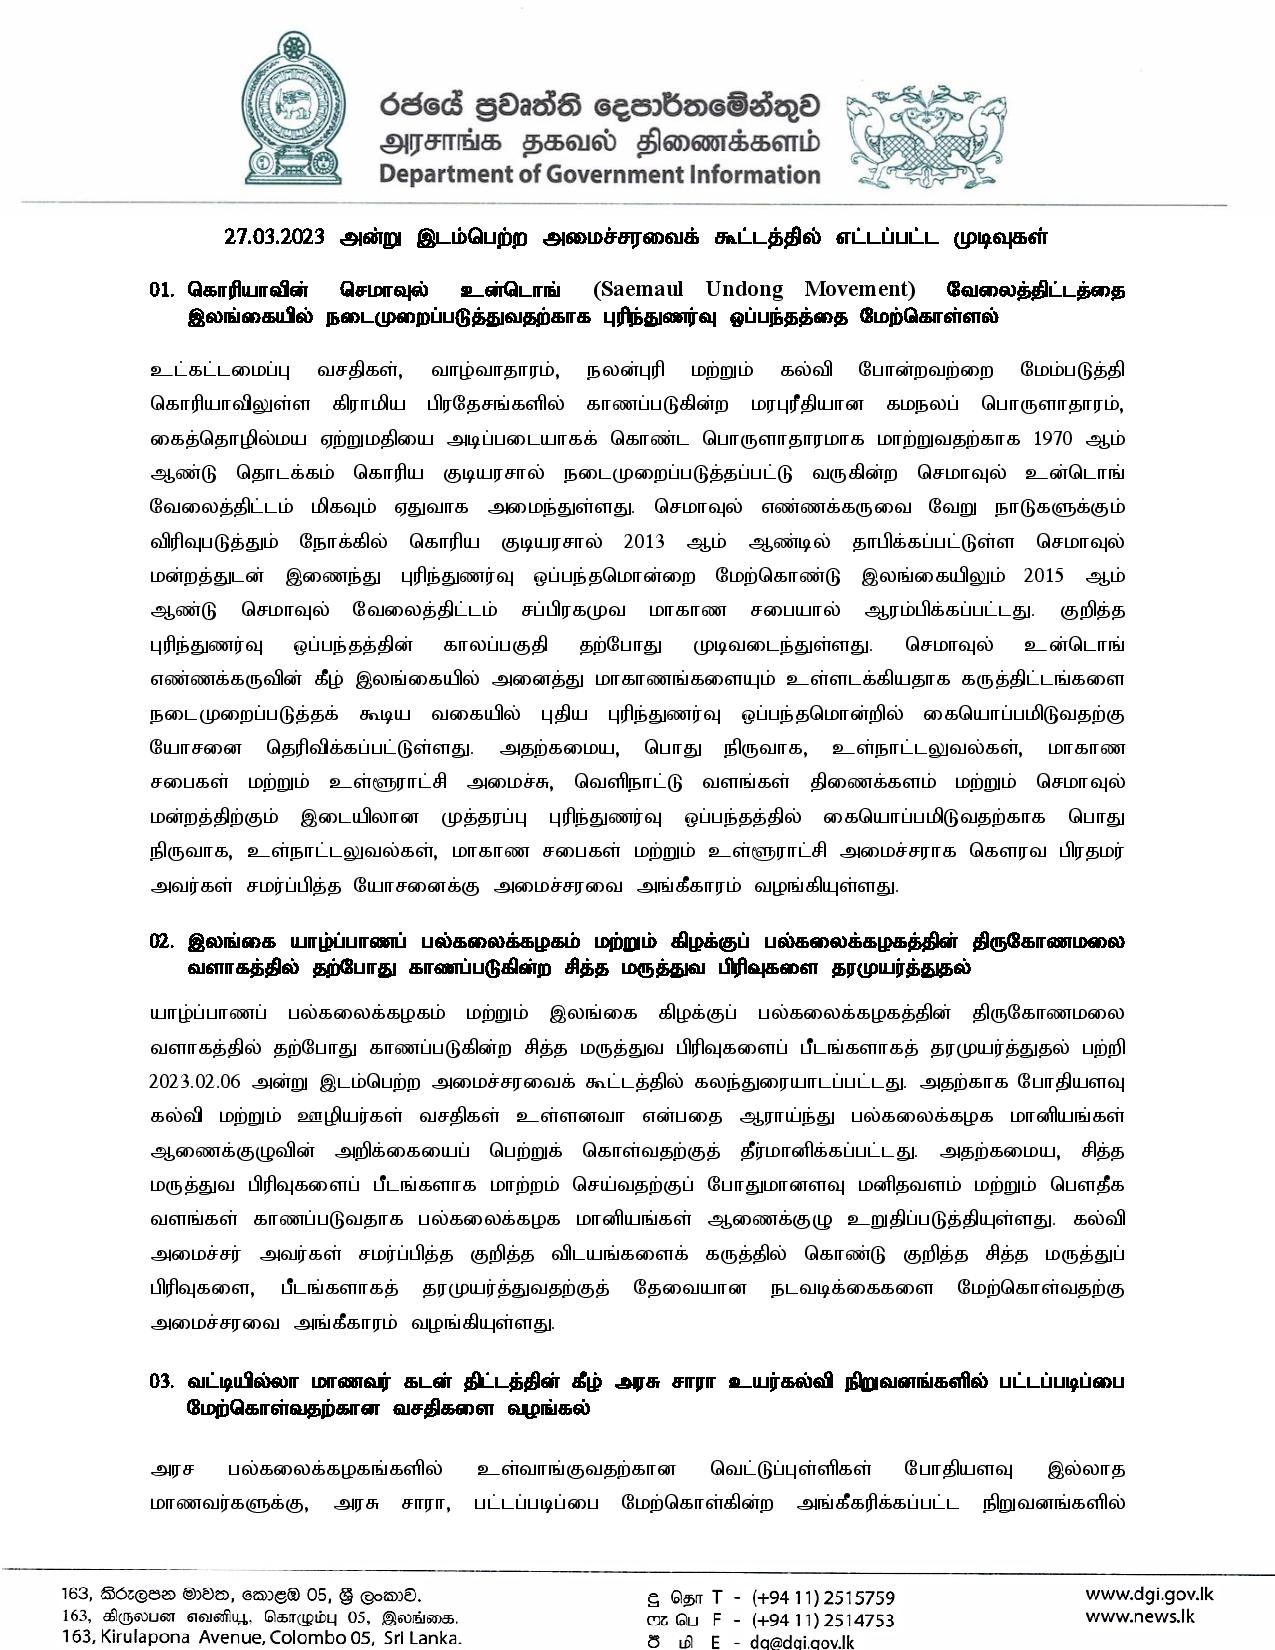 Cabinet Decisions on 27.03.2023 Tamil page 001